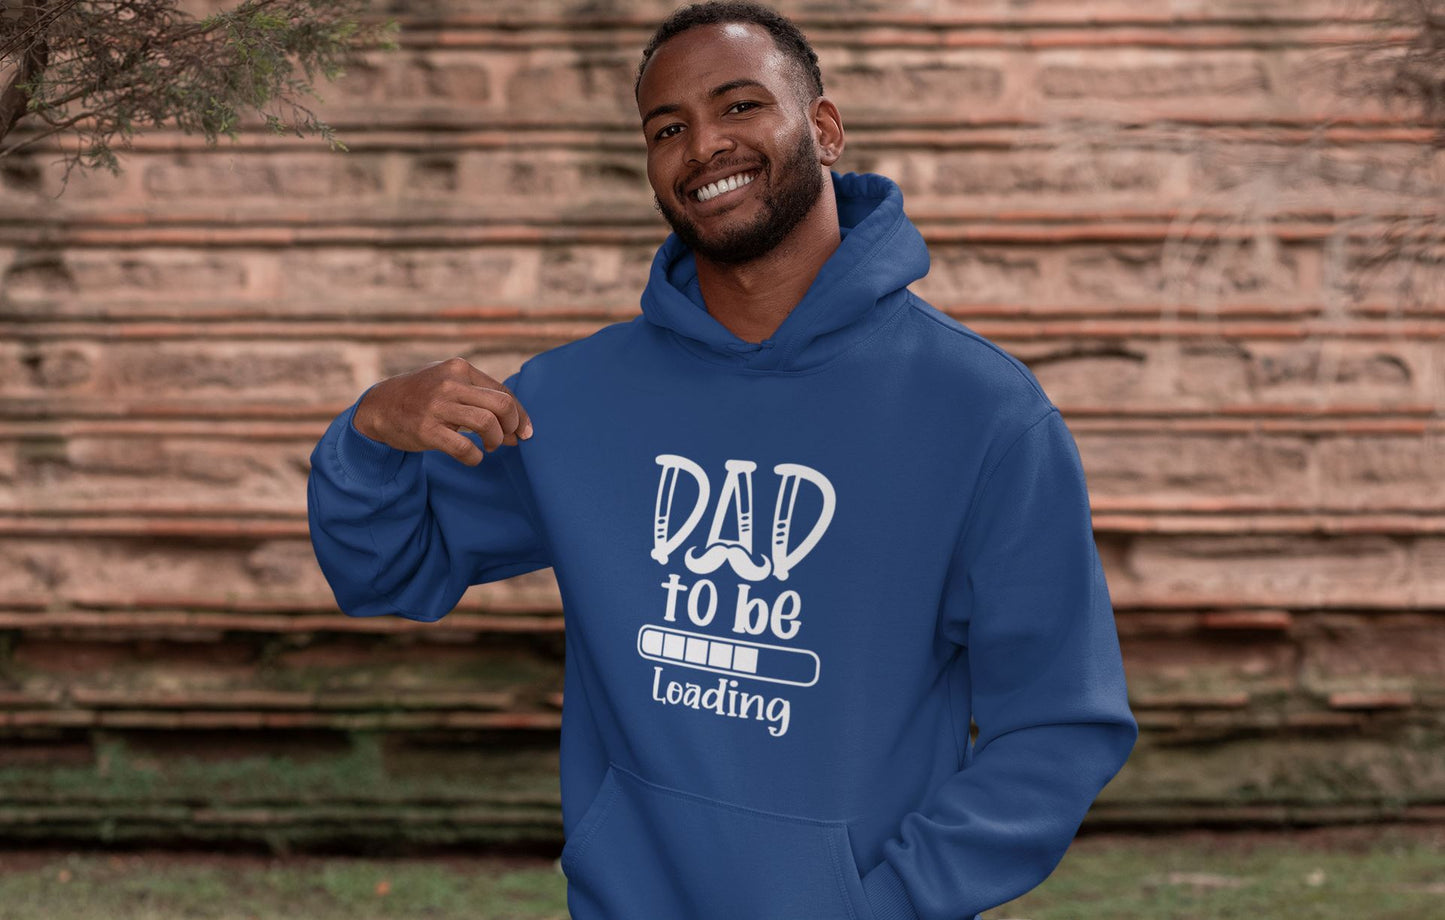 Dad to be Loading Hoody